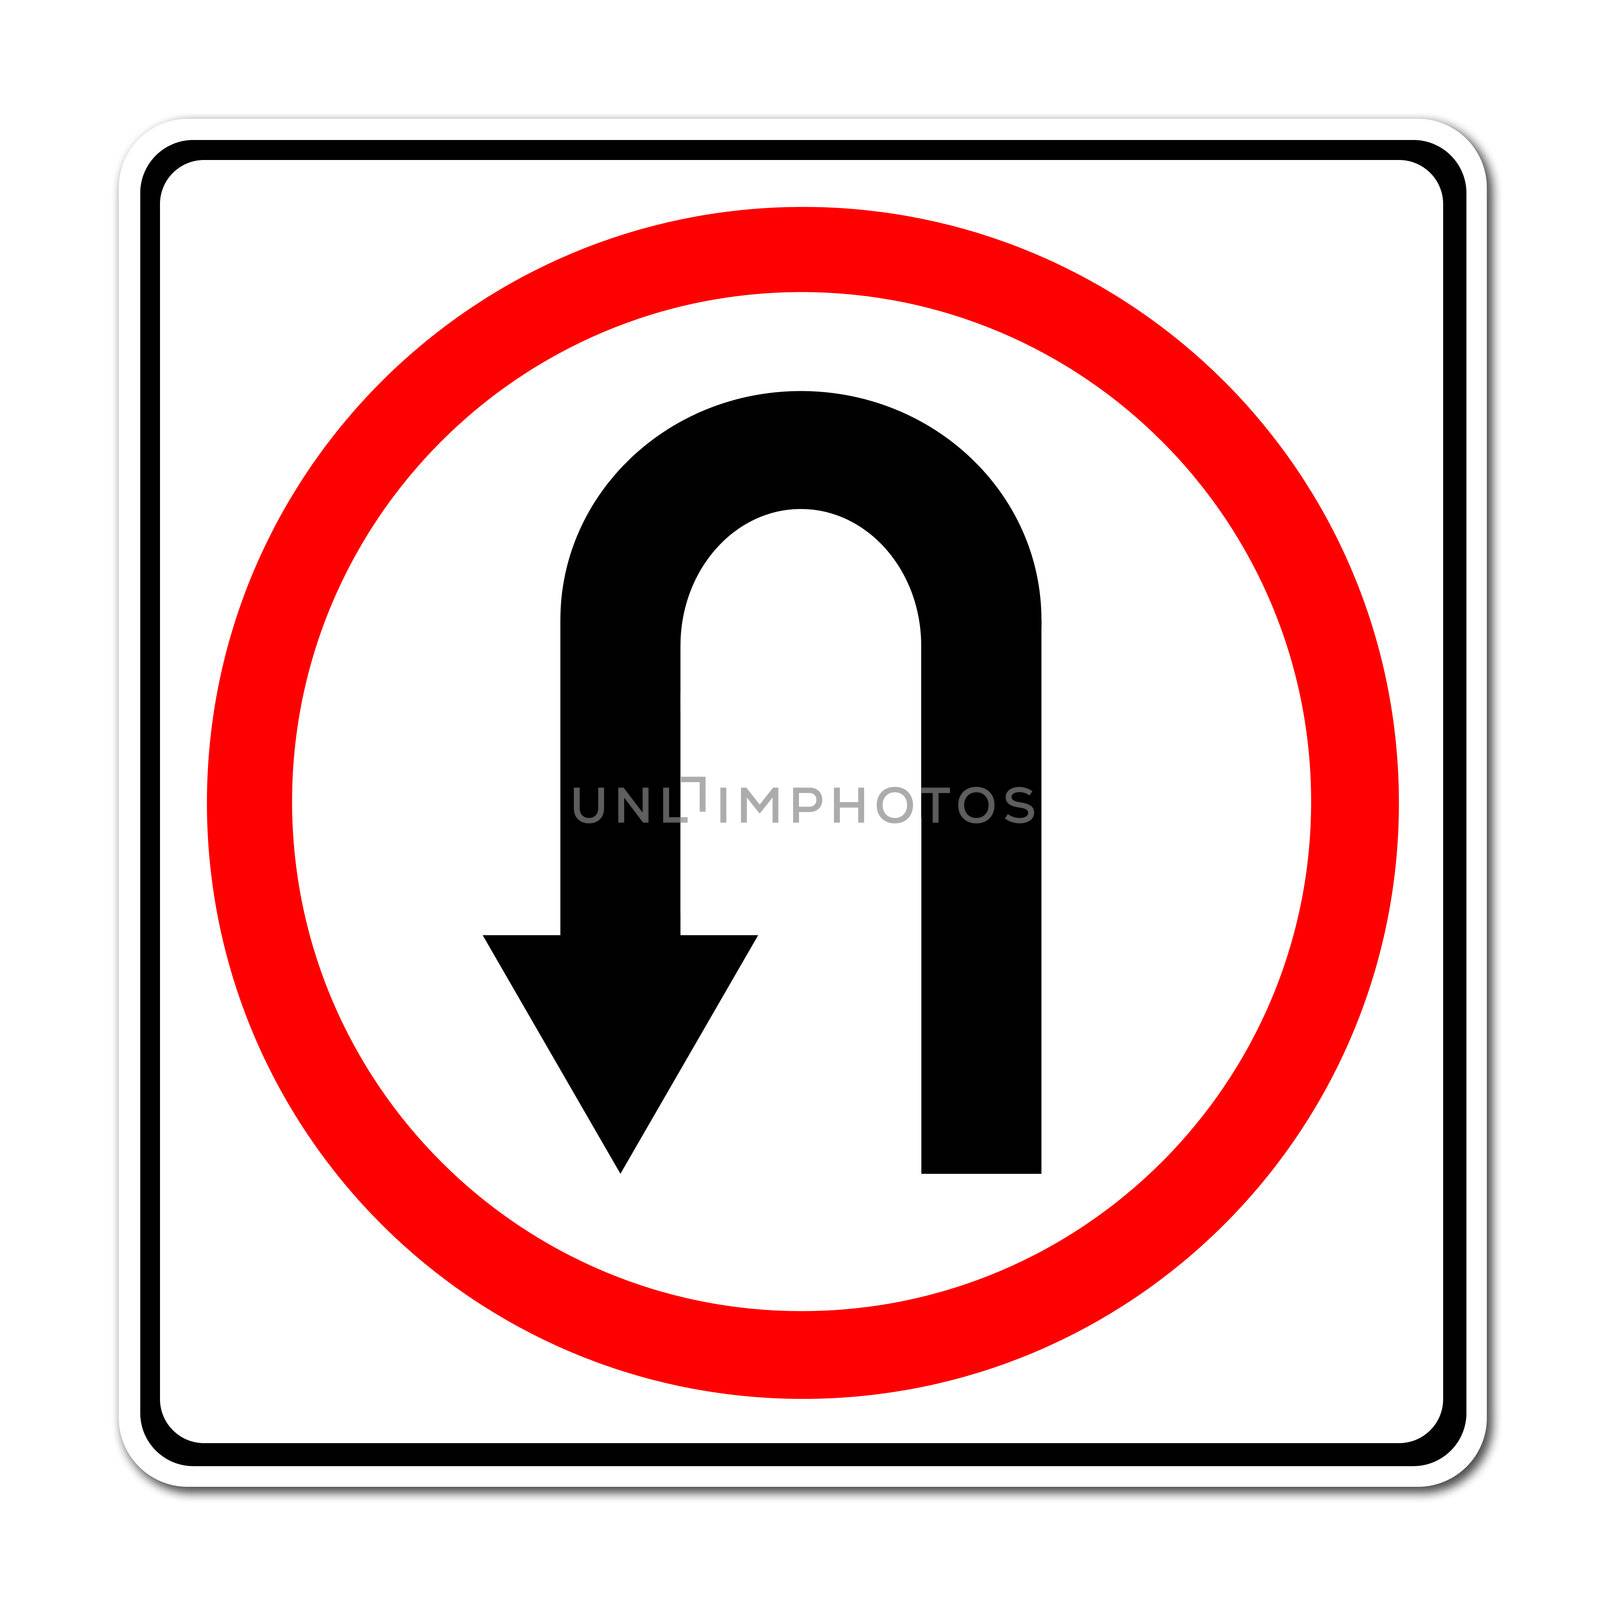 Turn back road sign by geargodz